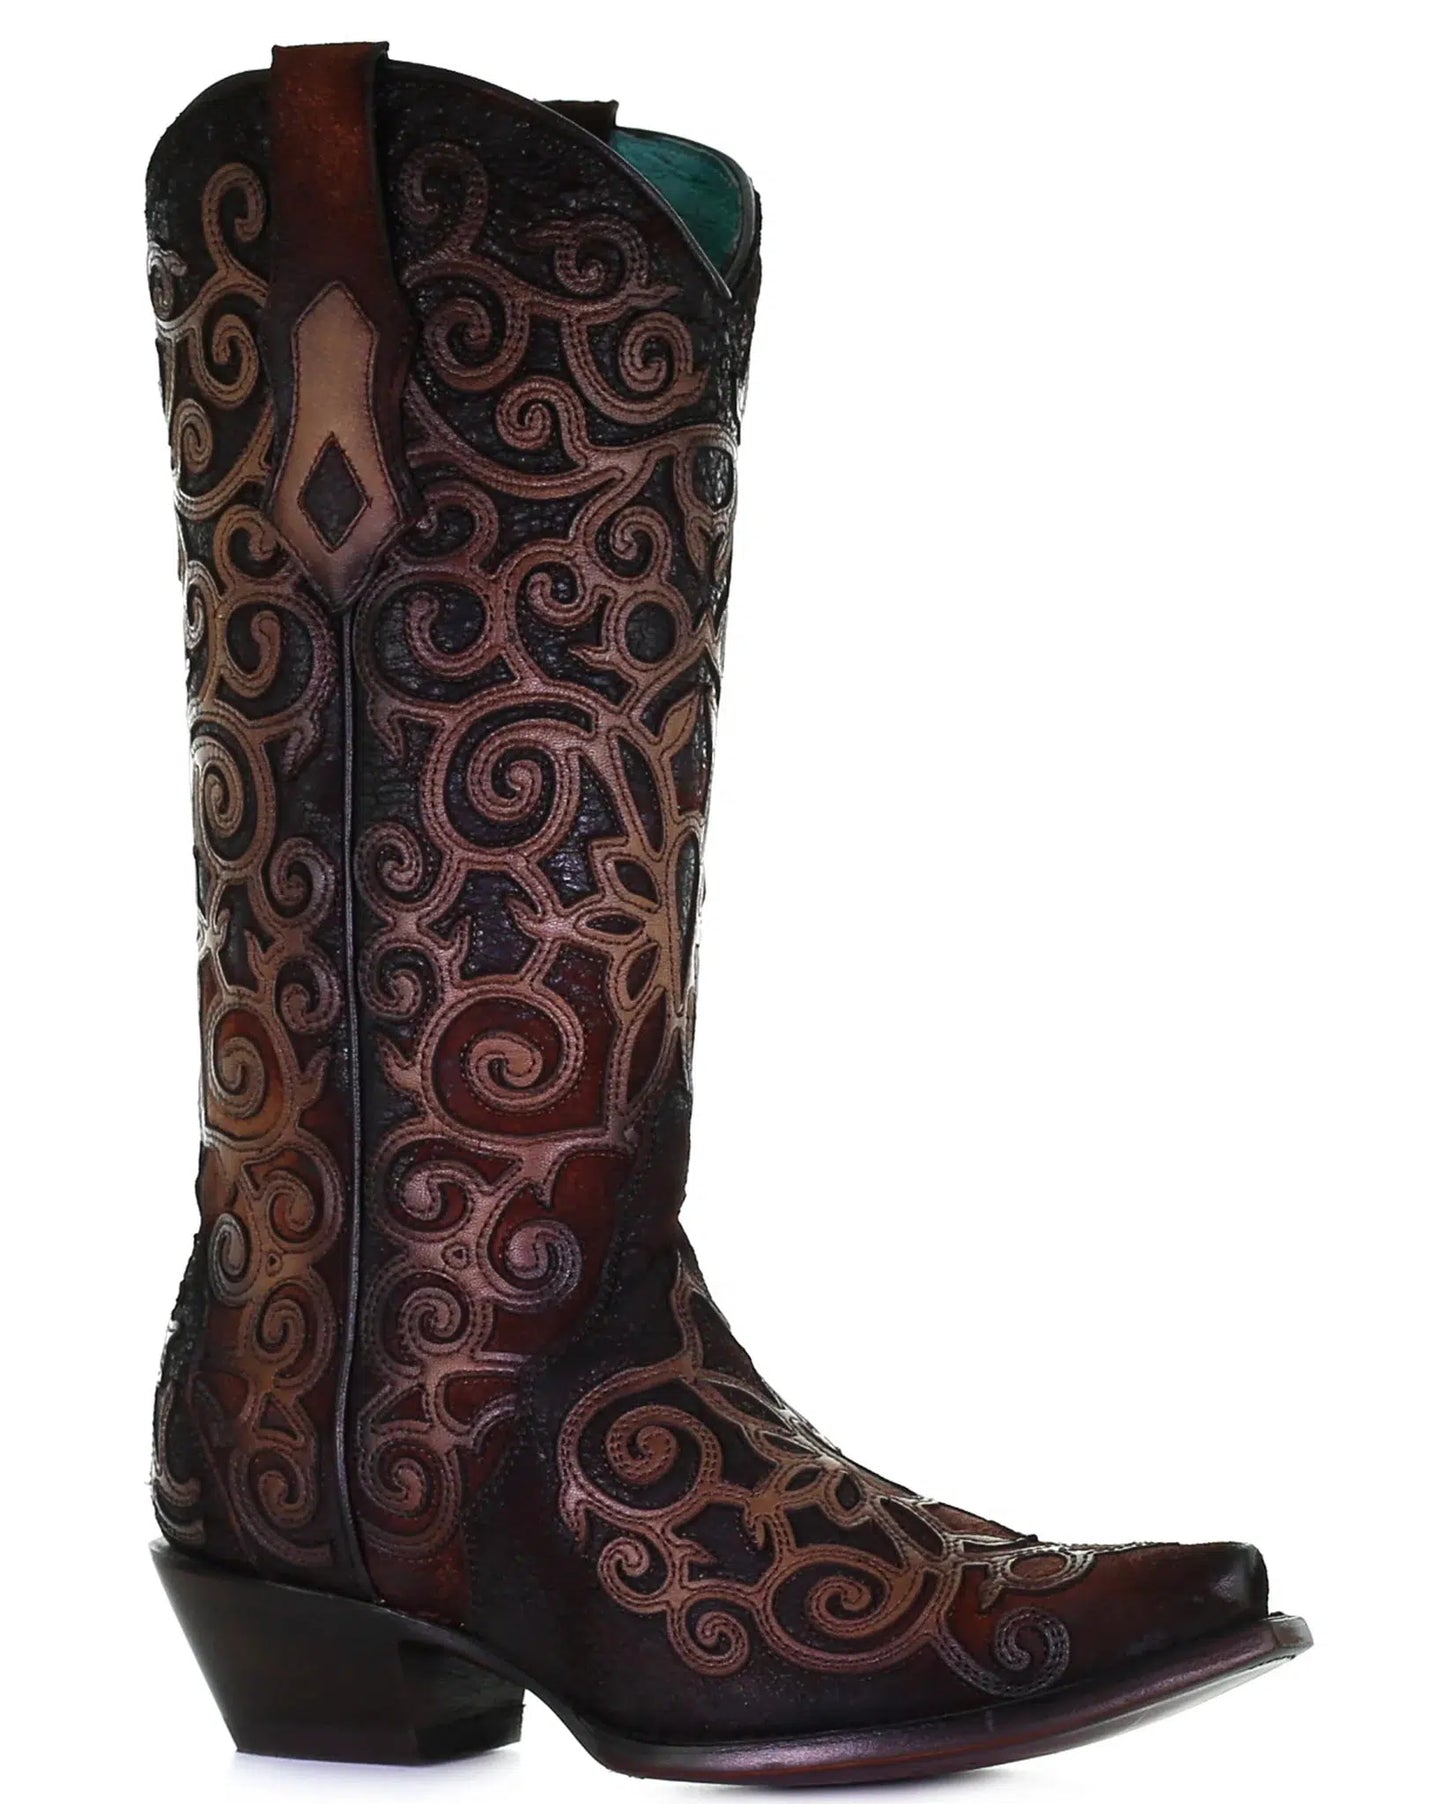 C3744-M Corral brown and red cowhide leather boots for women-Kuet.us